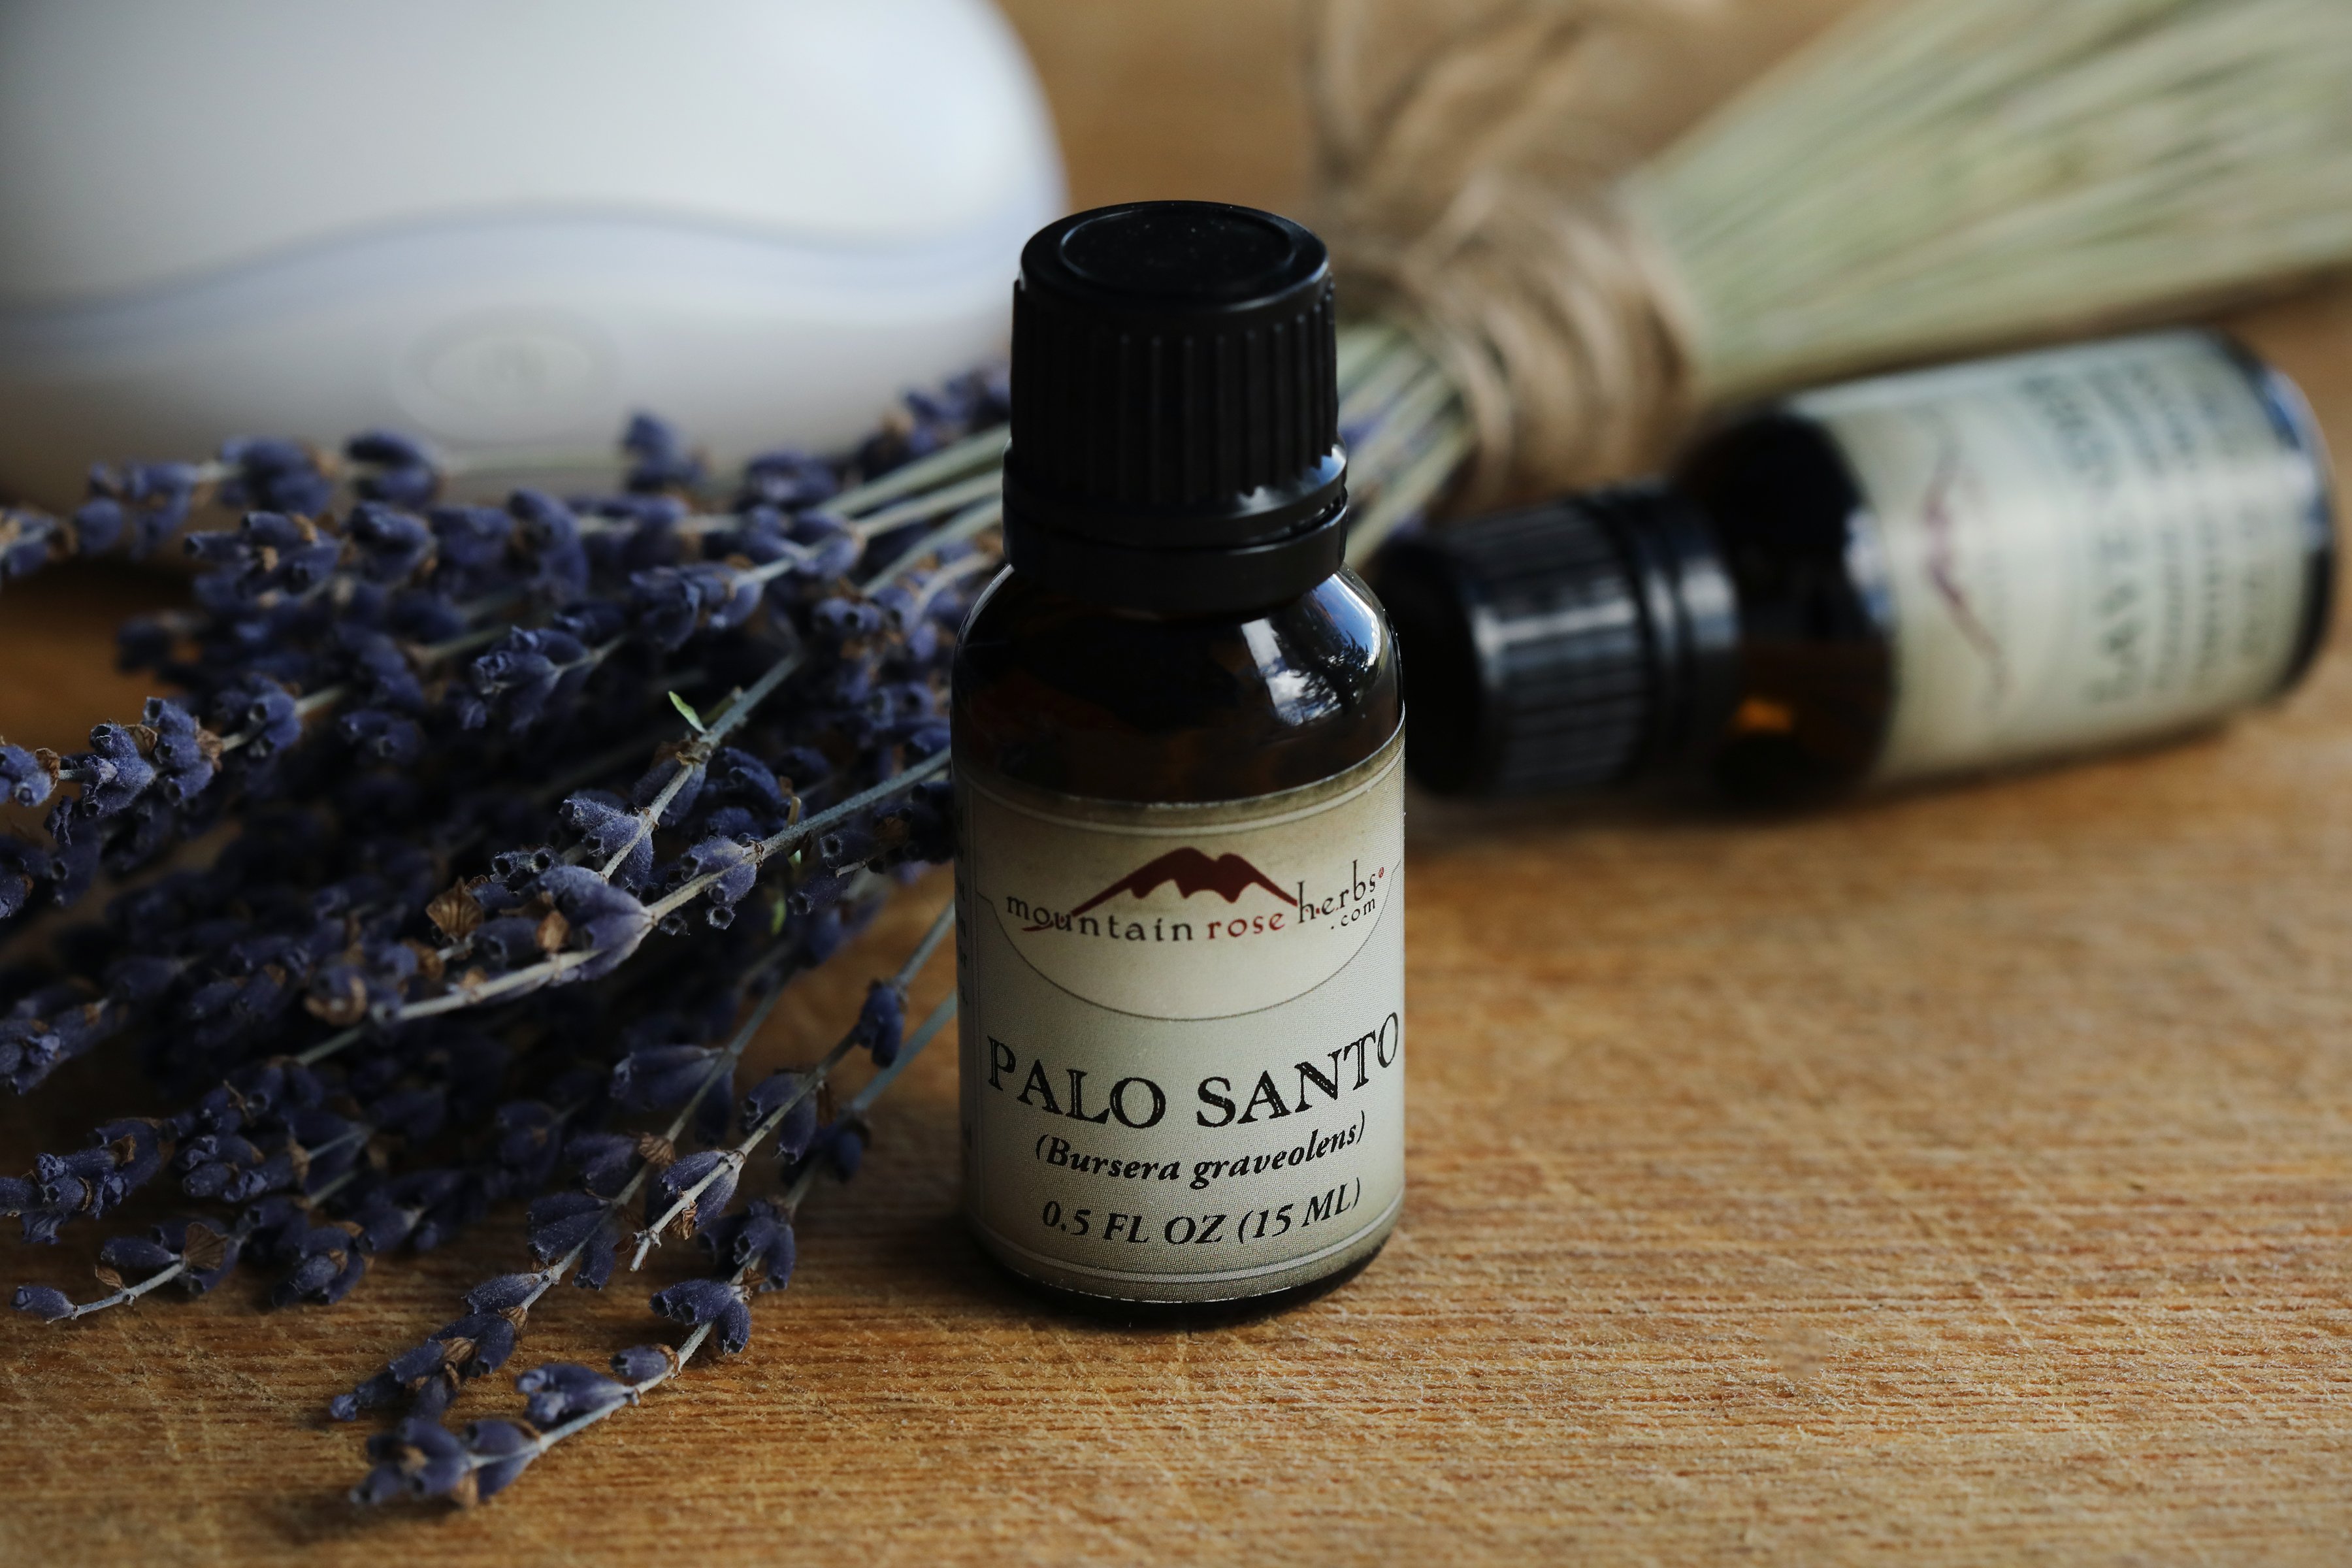 Palo santo and lavender essential oils arranged with a bouquet of lavender flowers. An aromatic diffuser is in the background.  